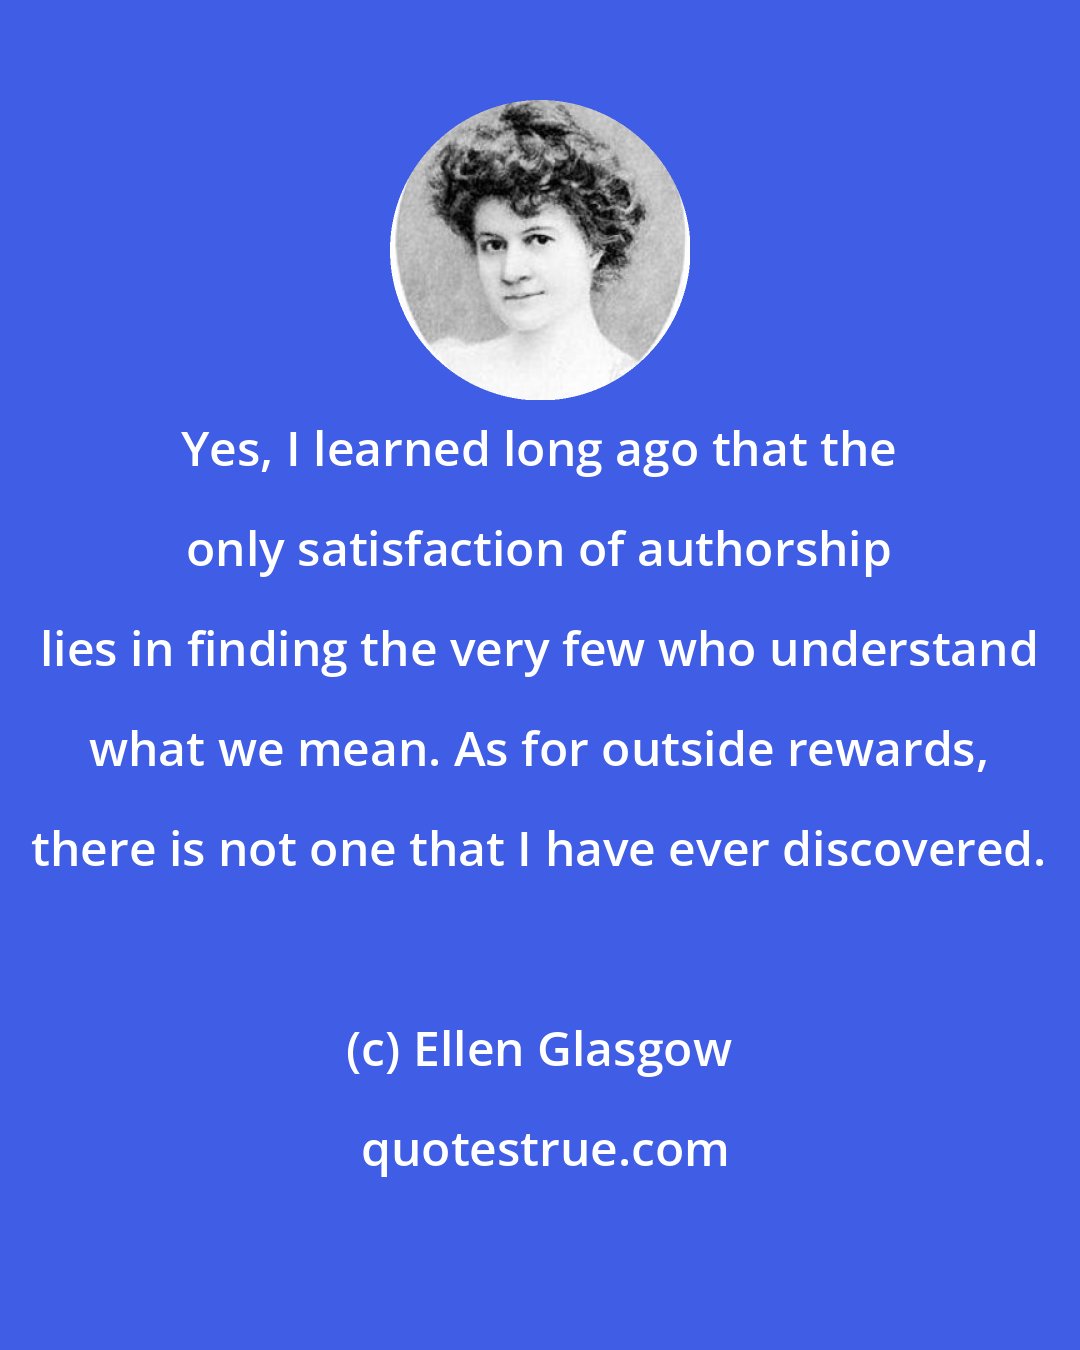 Ellen Glasgow: Yes, I learned long ago that the only satisfaction of authorship lies in finding the very few who understand what we mean. As for outside rewards, there is not one that I have ever discovered.